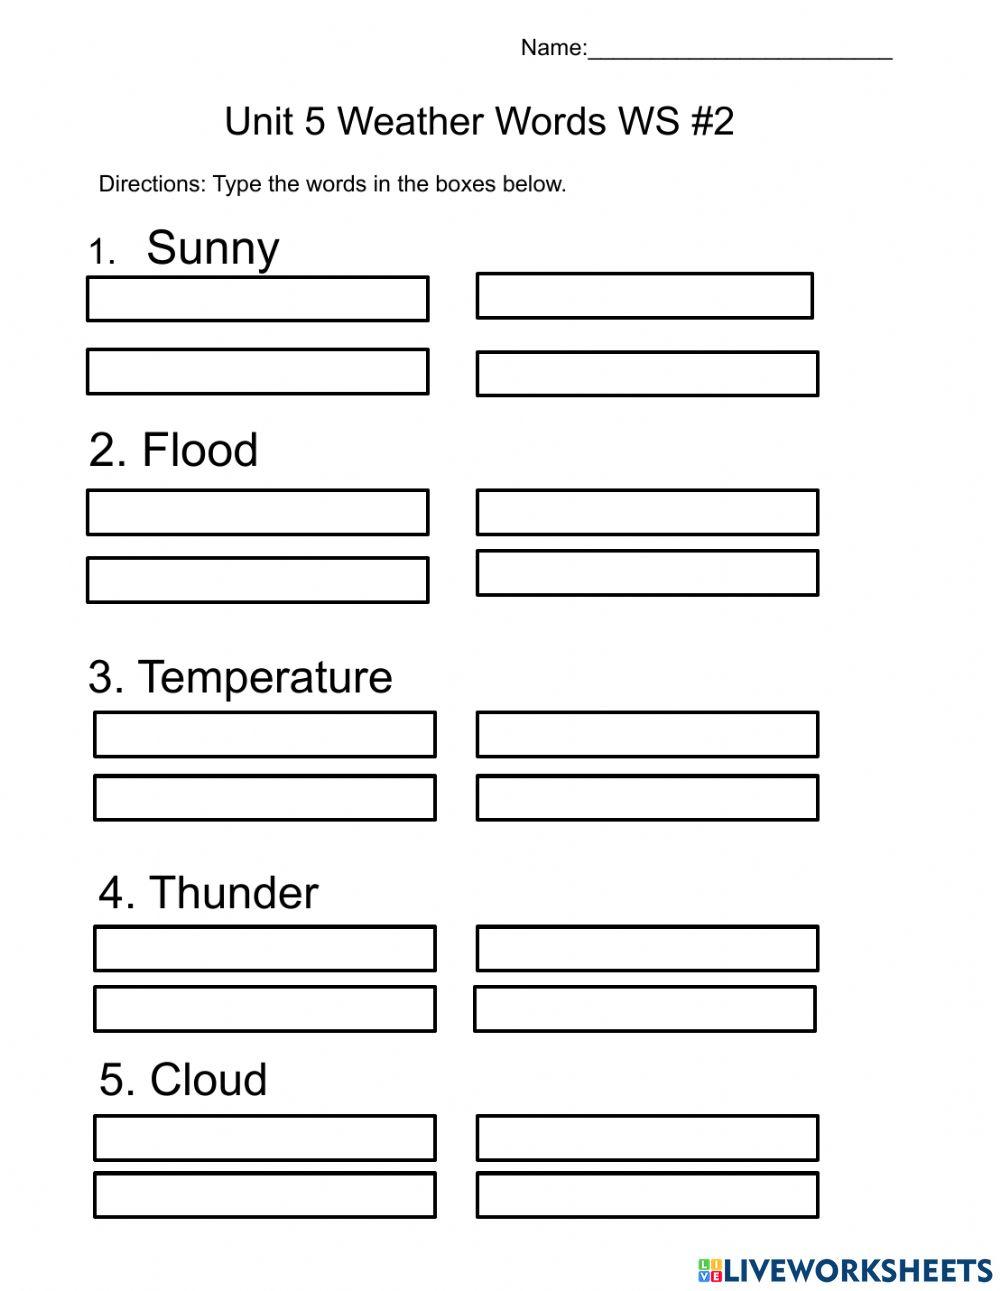 Unit 5 - Weather Words Fill in the Words WS 2